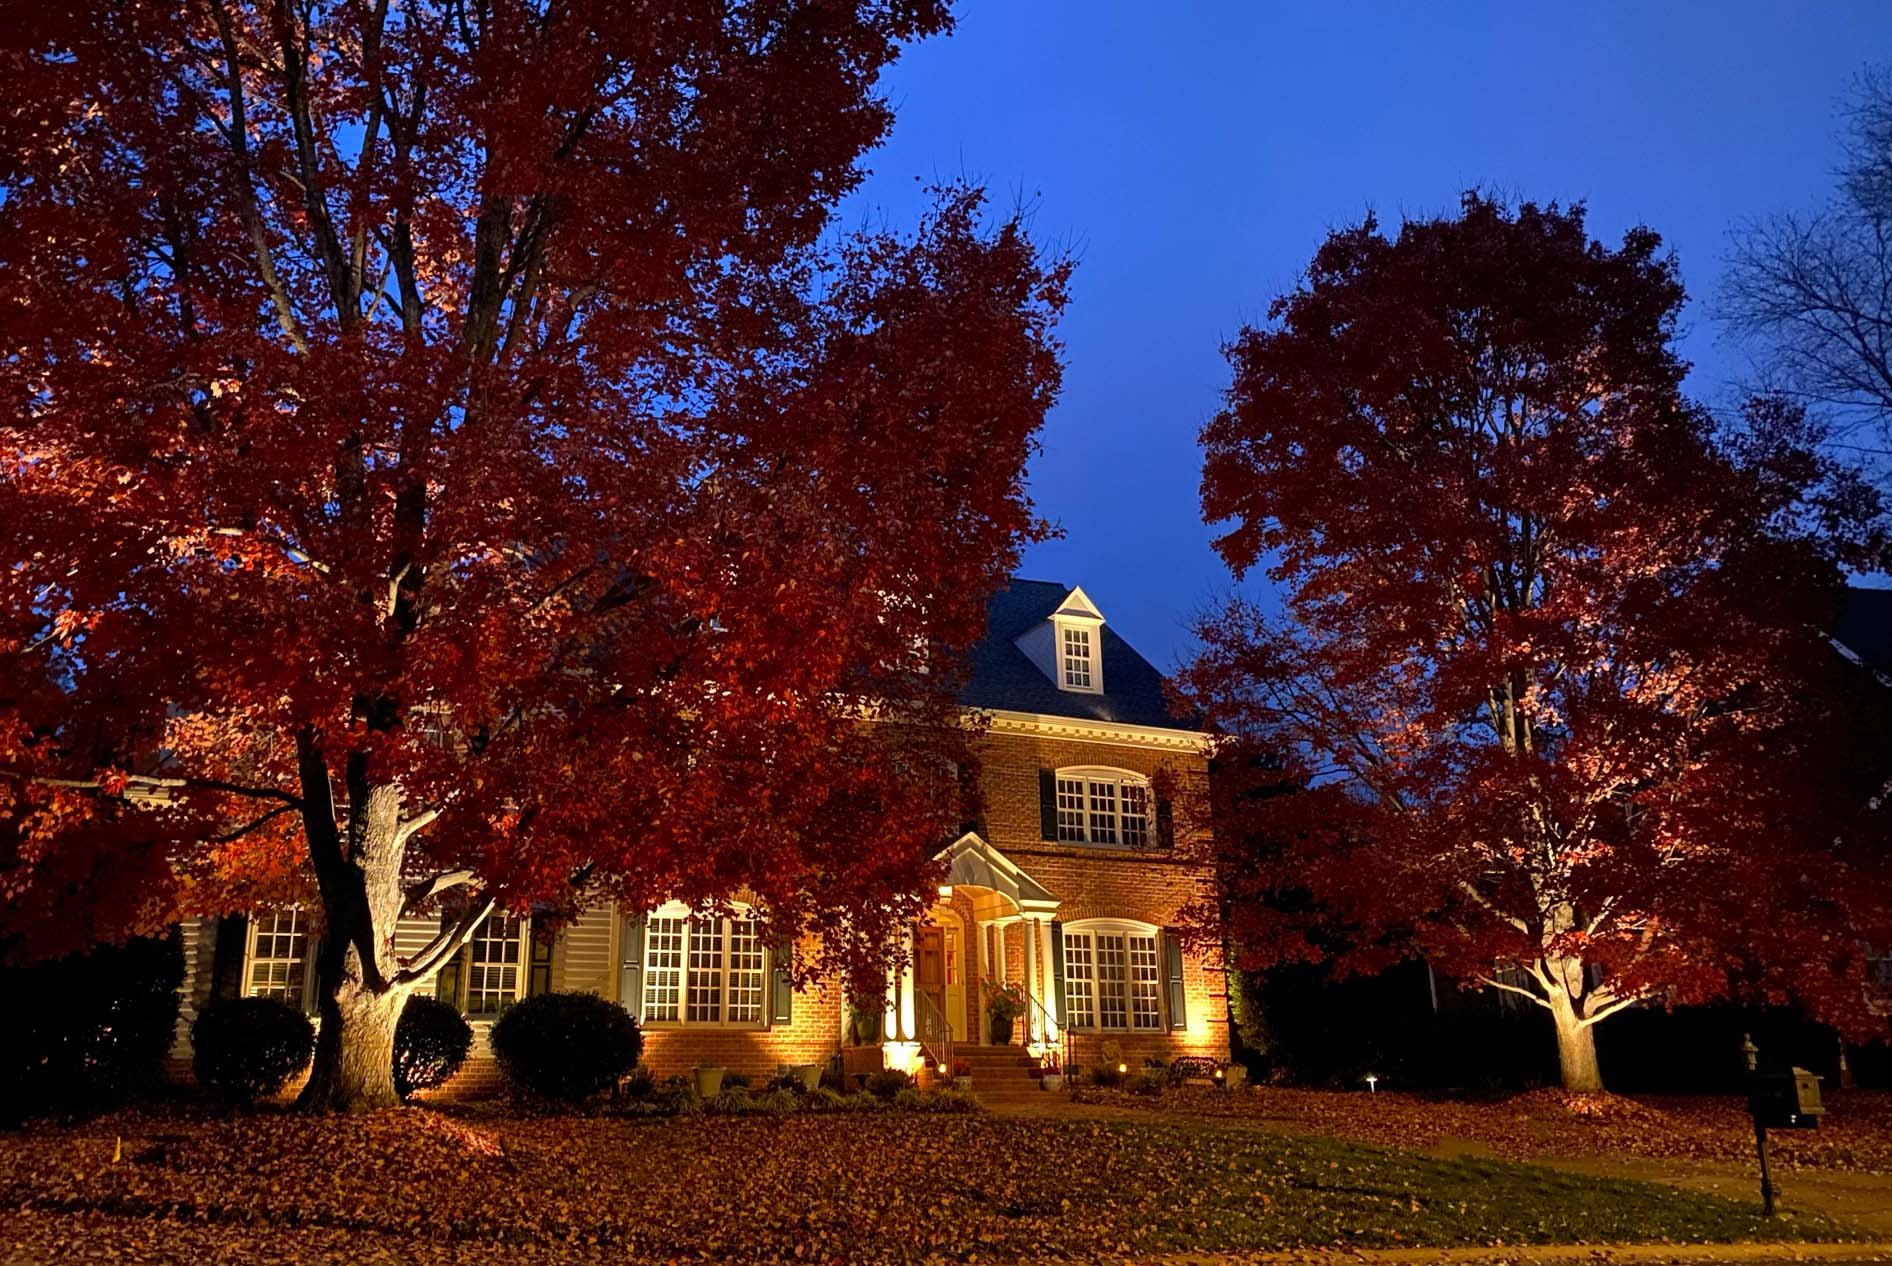  Red brick home with soft architectural and landscape lighting. The home has a large tree in front with red leaves. 